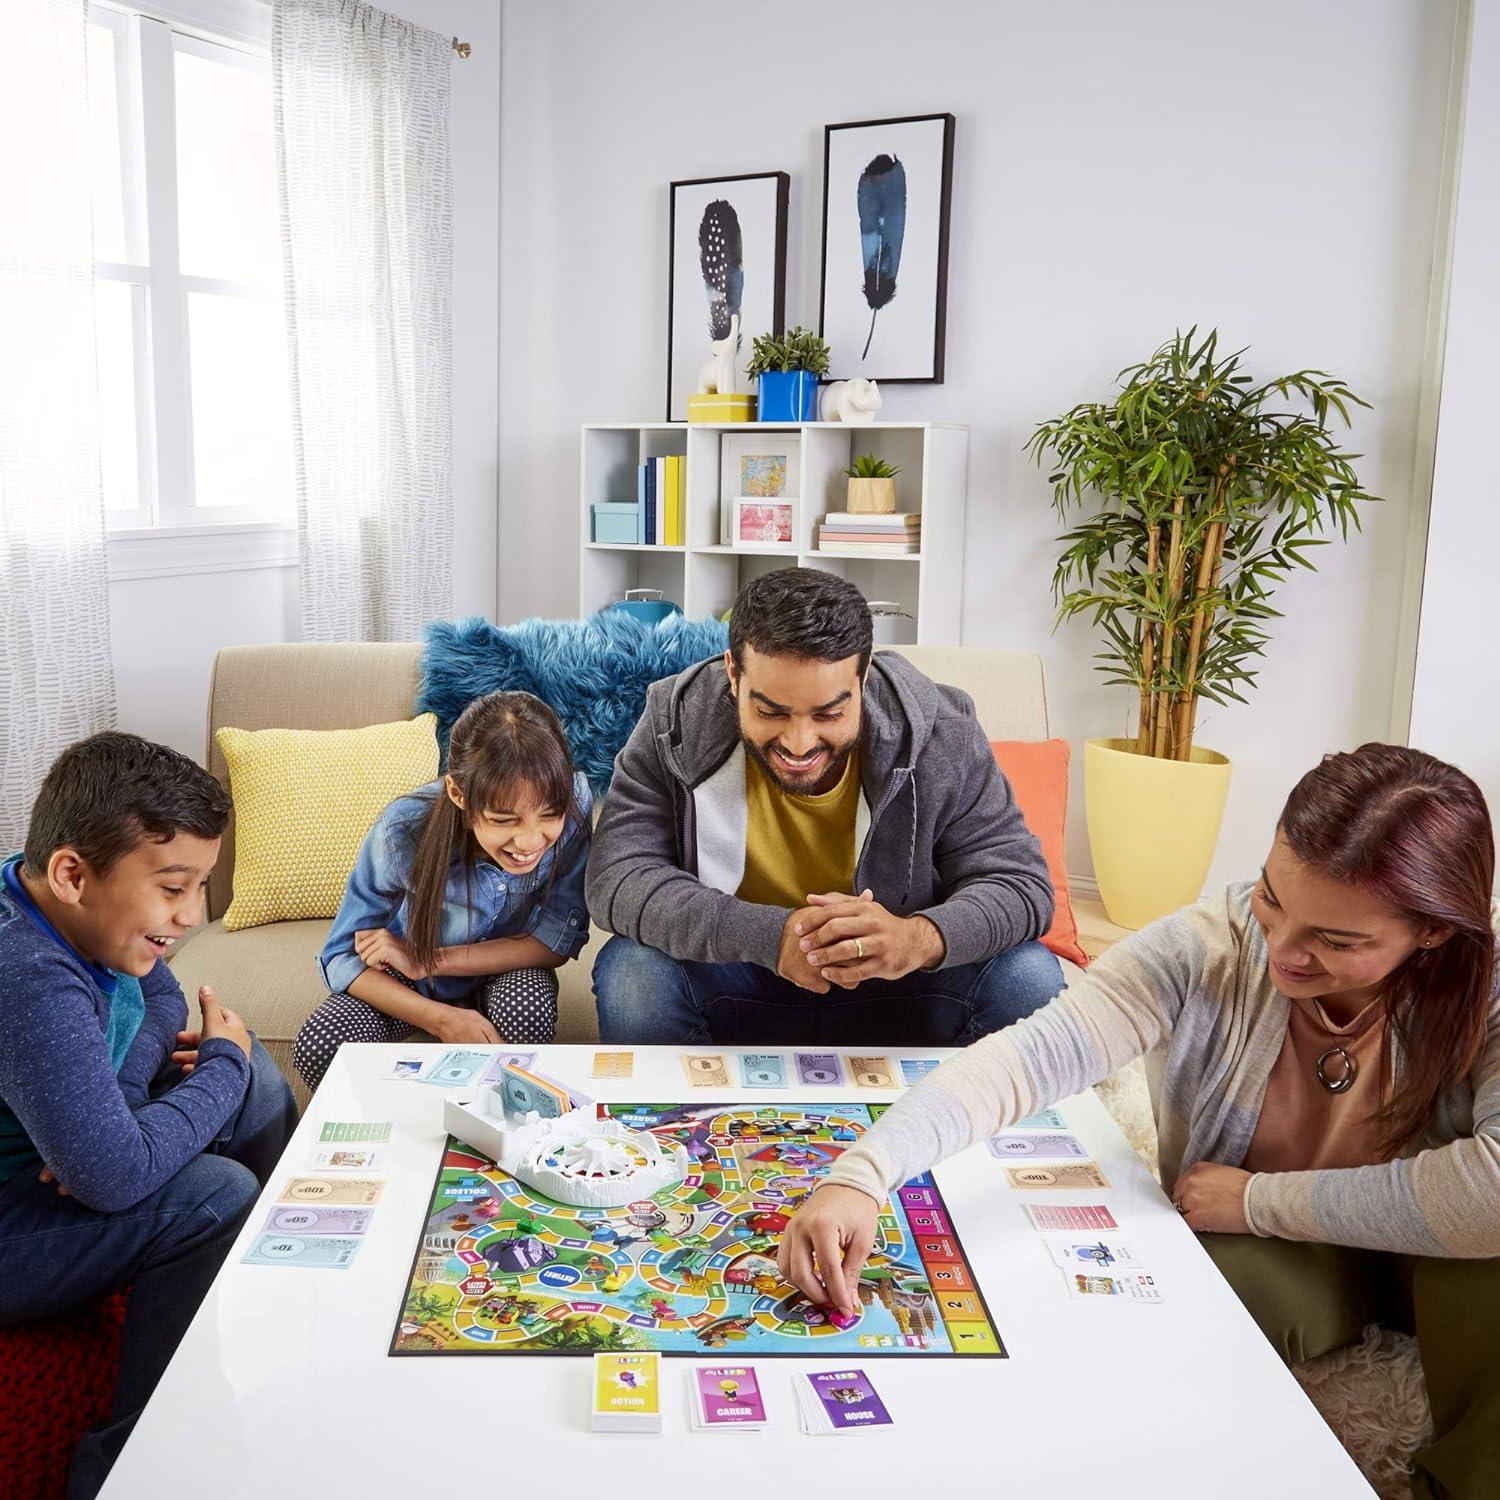 Hasbro Gaming The Game of Life Game, Family Board Game for 2-4 Players, Indoor Game for Kids Ages 8 and Up, Pegs Come in 6 Colors - BumbleToys - 8-13 Years, Boys, Card & Board Games, Girls, Puzzle & Board & Card Games